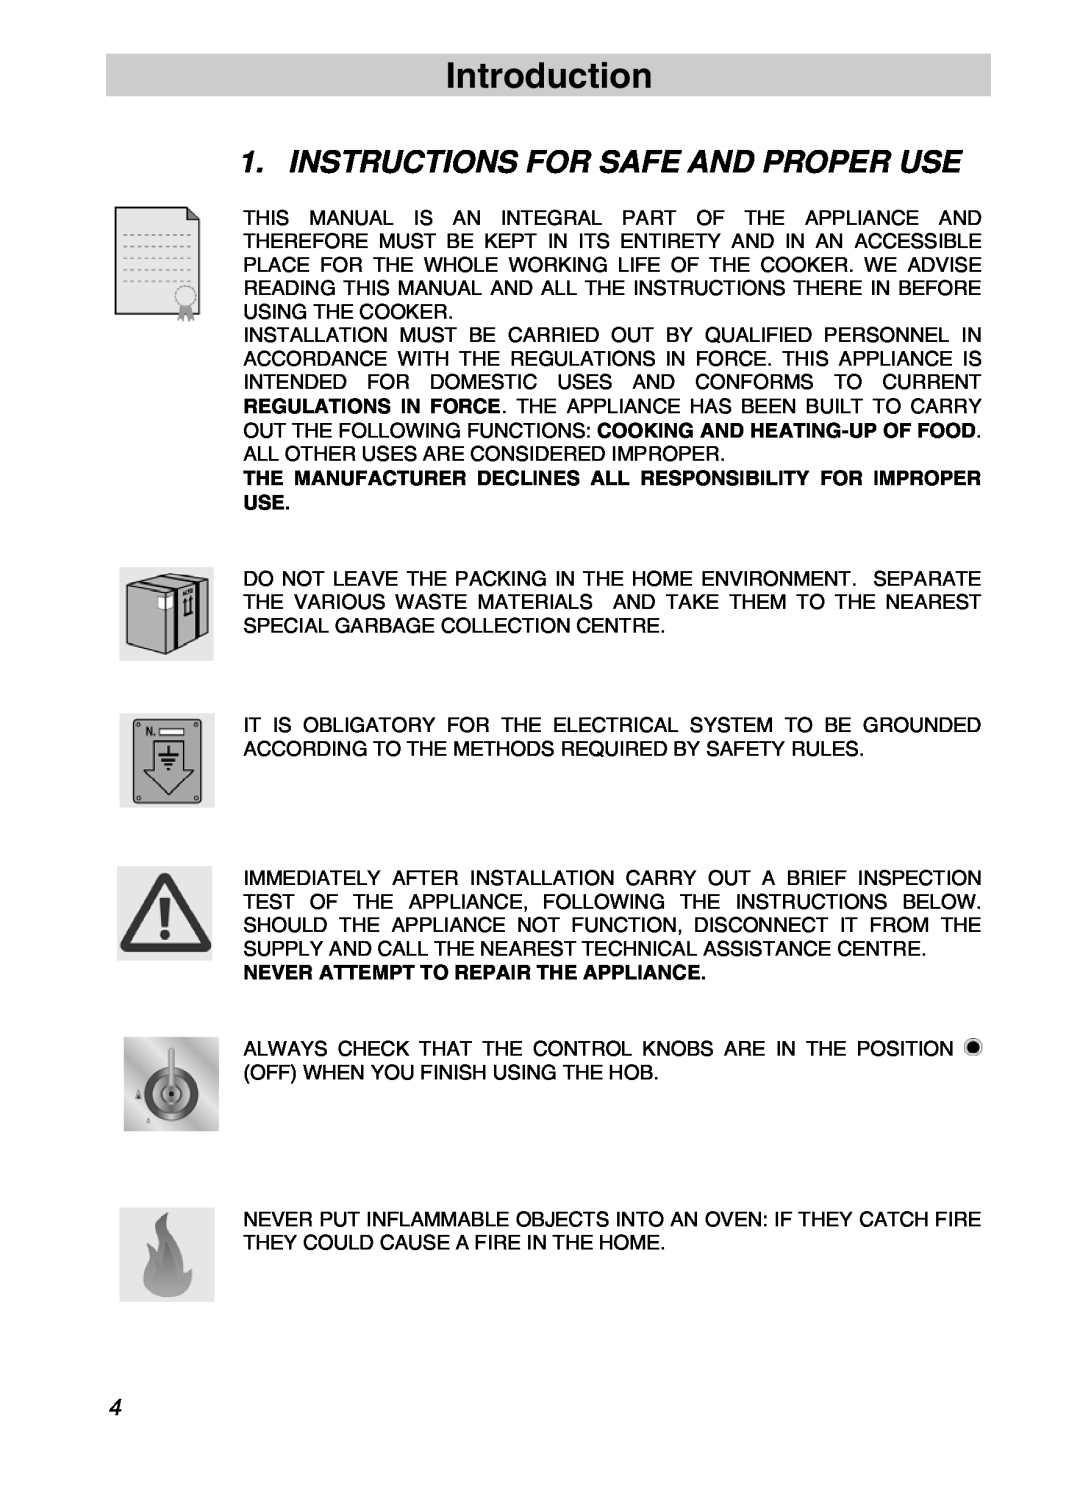 Smeg CSA19ID-6 manual Introduction, Instructions For Safe And Proper Use, Never Attempt To Repair The Appliance 